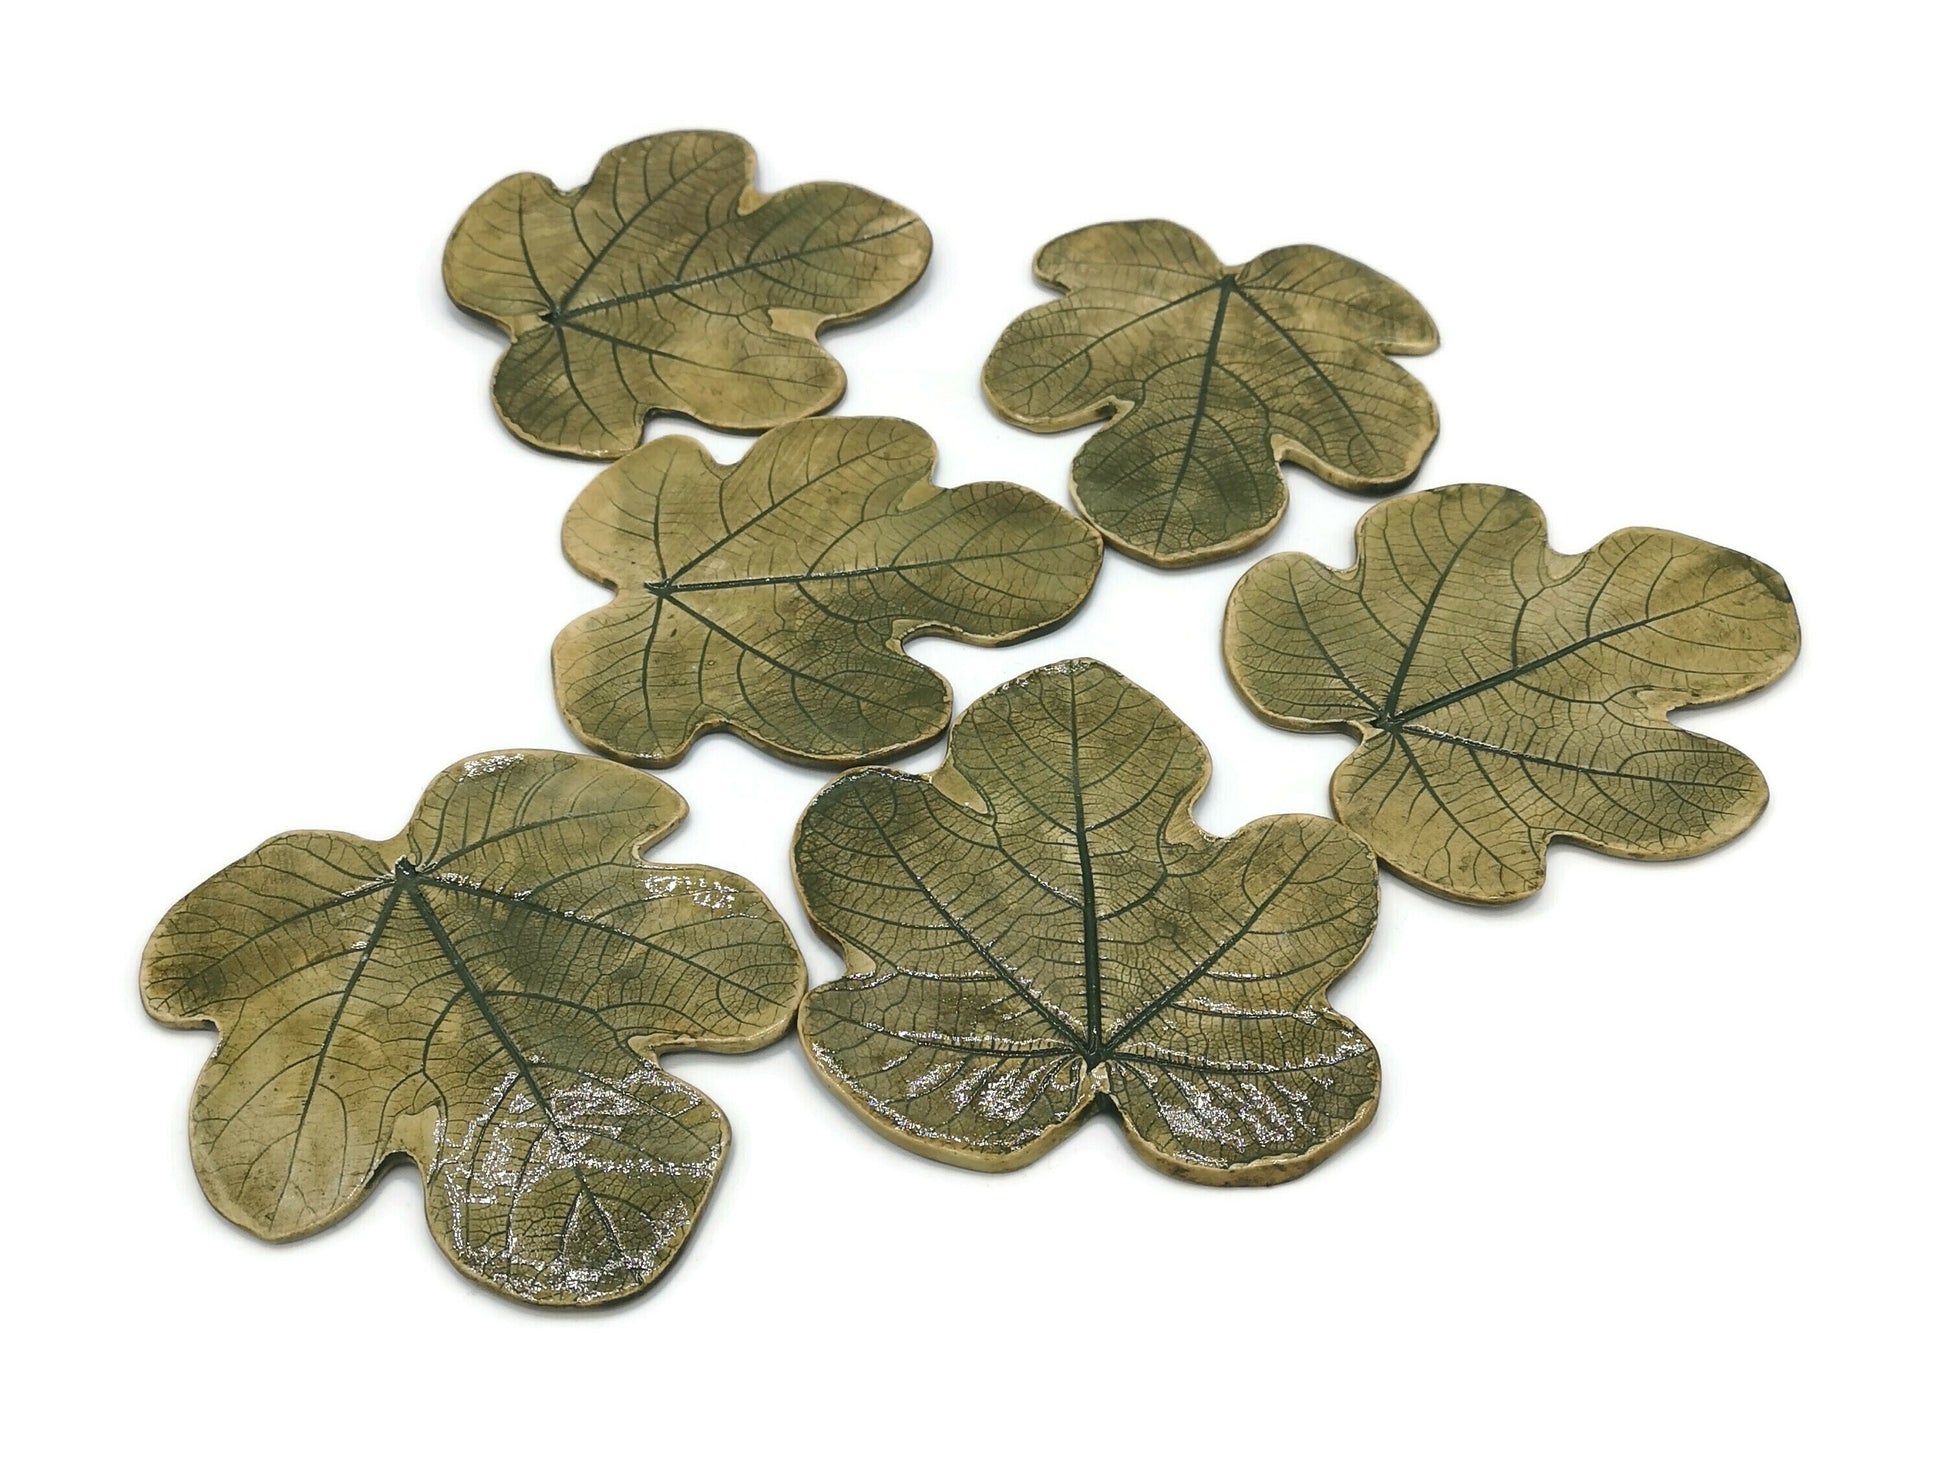 Set Of 6 Handmade Ceramic Green Coasters Fig Leaf Shaped, Housewarming Gift First Home, Mom Birthday Gift From Daughter, Fall Home Decor - Ceramica Ana Rafael